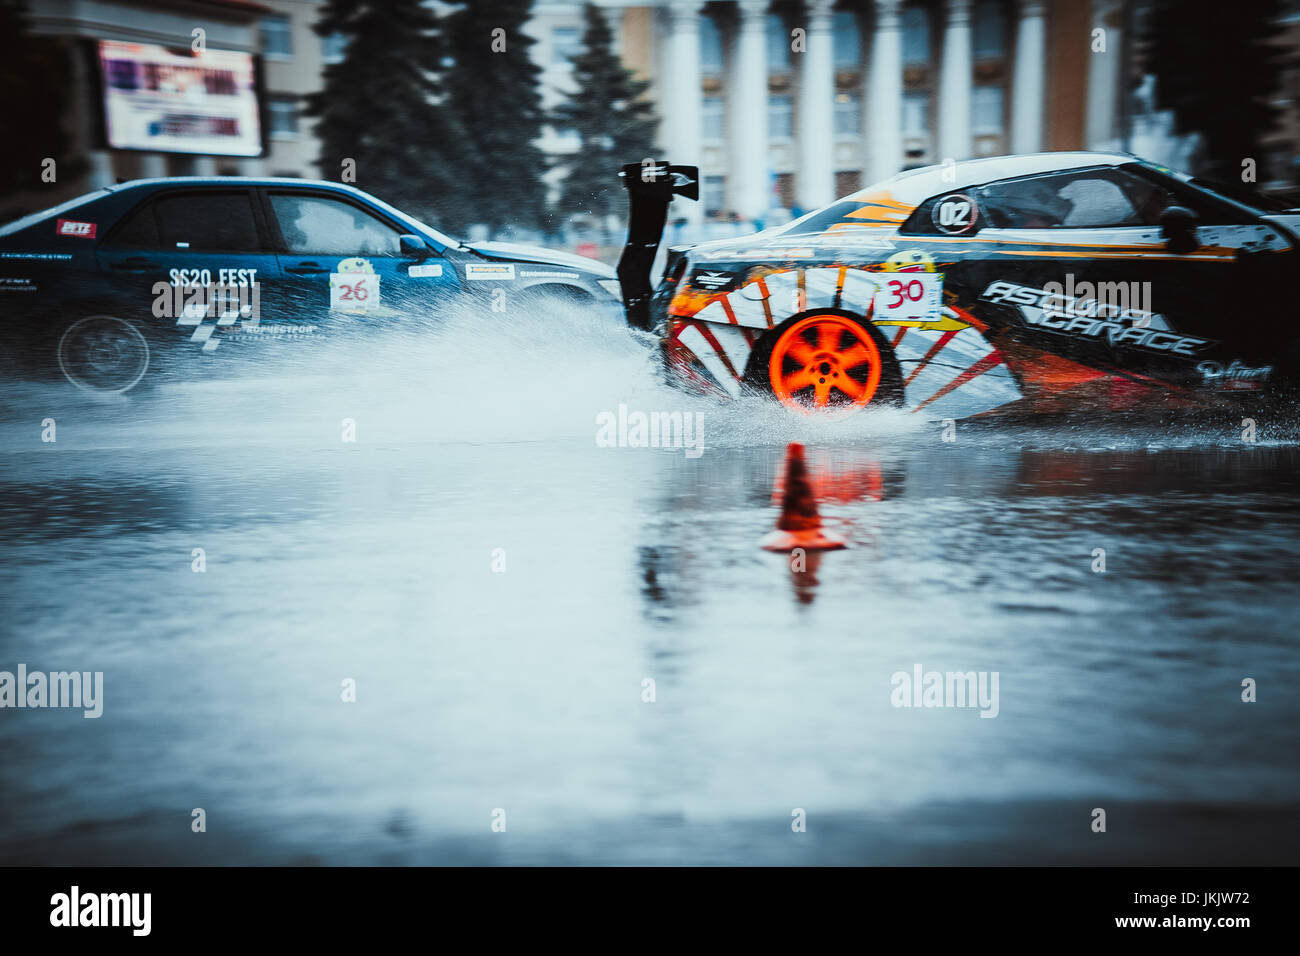 Novokuibyshevsk, Russia - June 24, 2017:Technopark.The machine effectively drifts at competitions.Editorial image Stock Photo